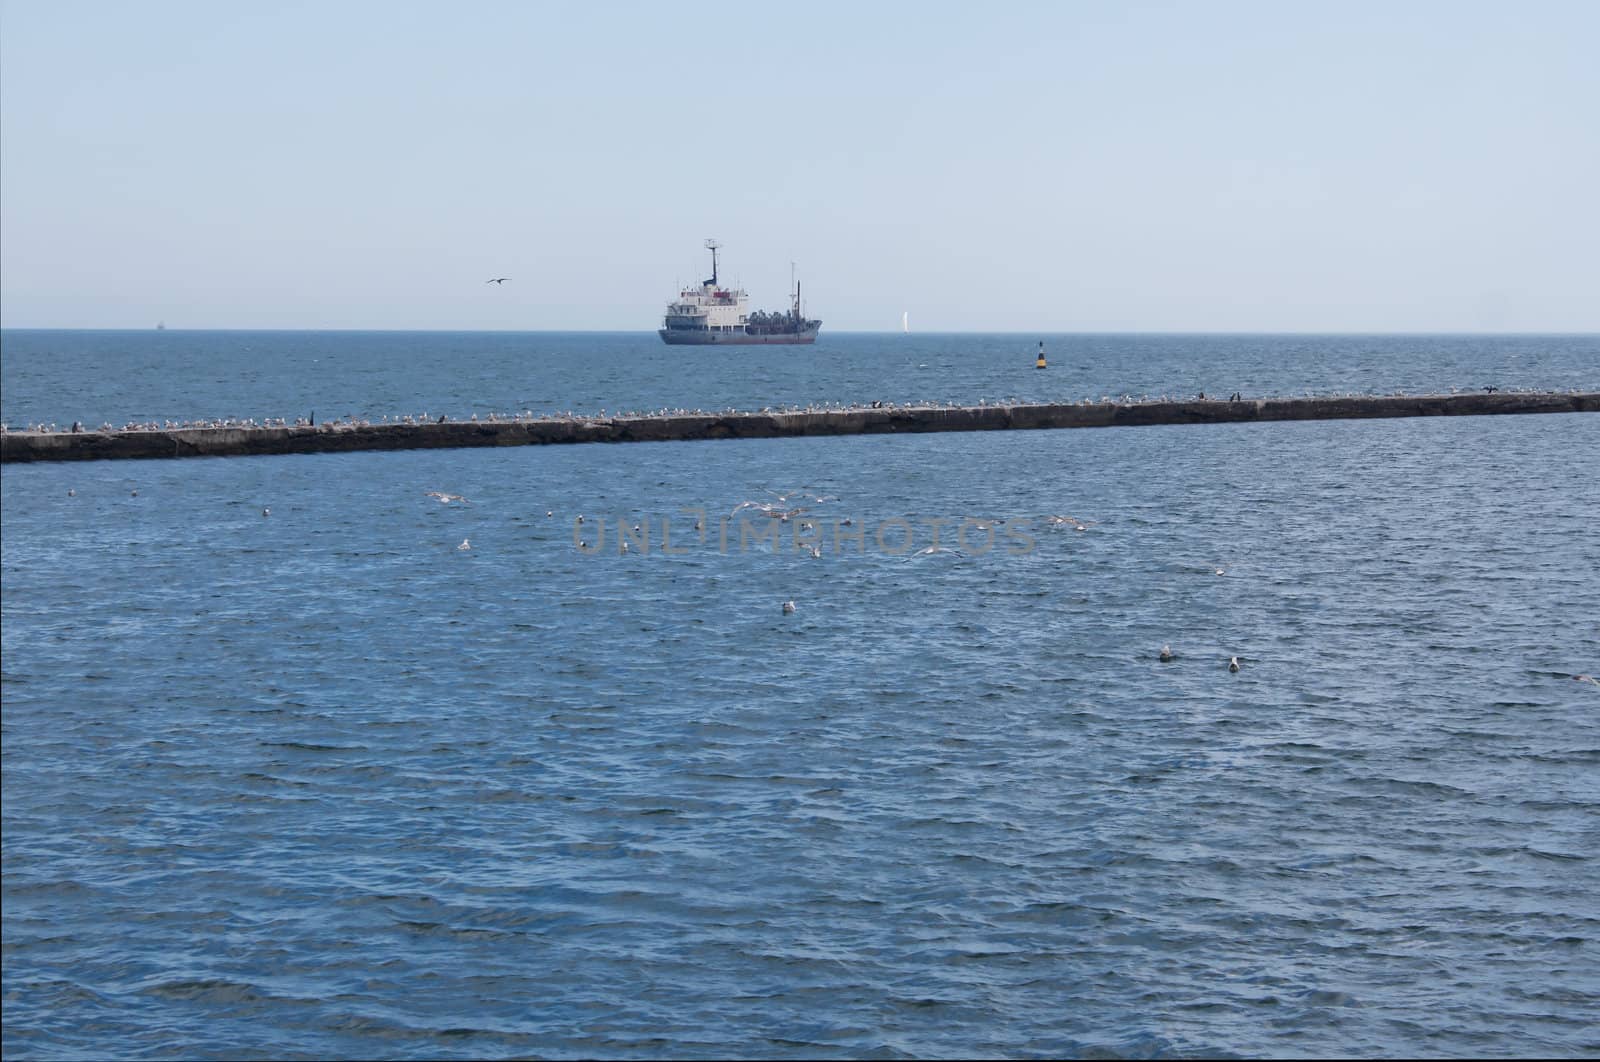 Sea view from the pier, seagulls and ship photography